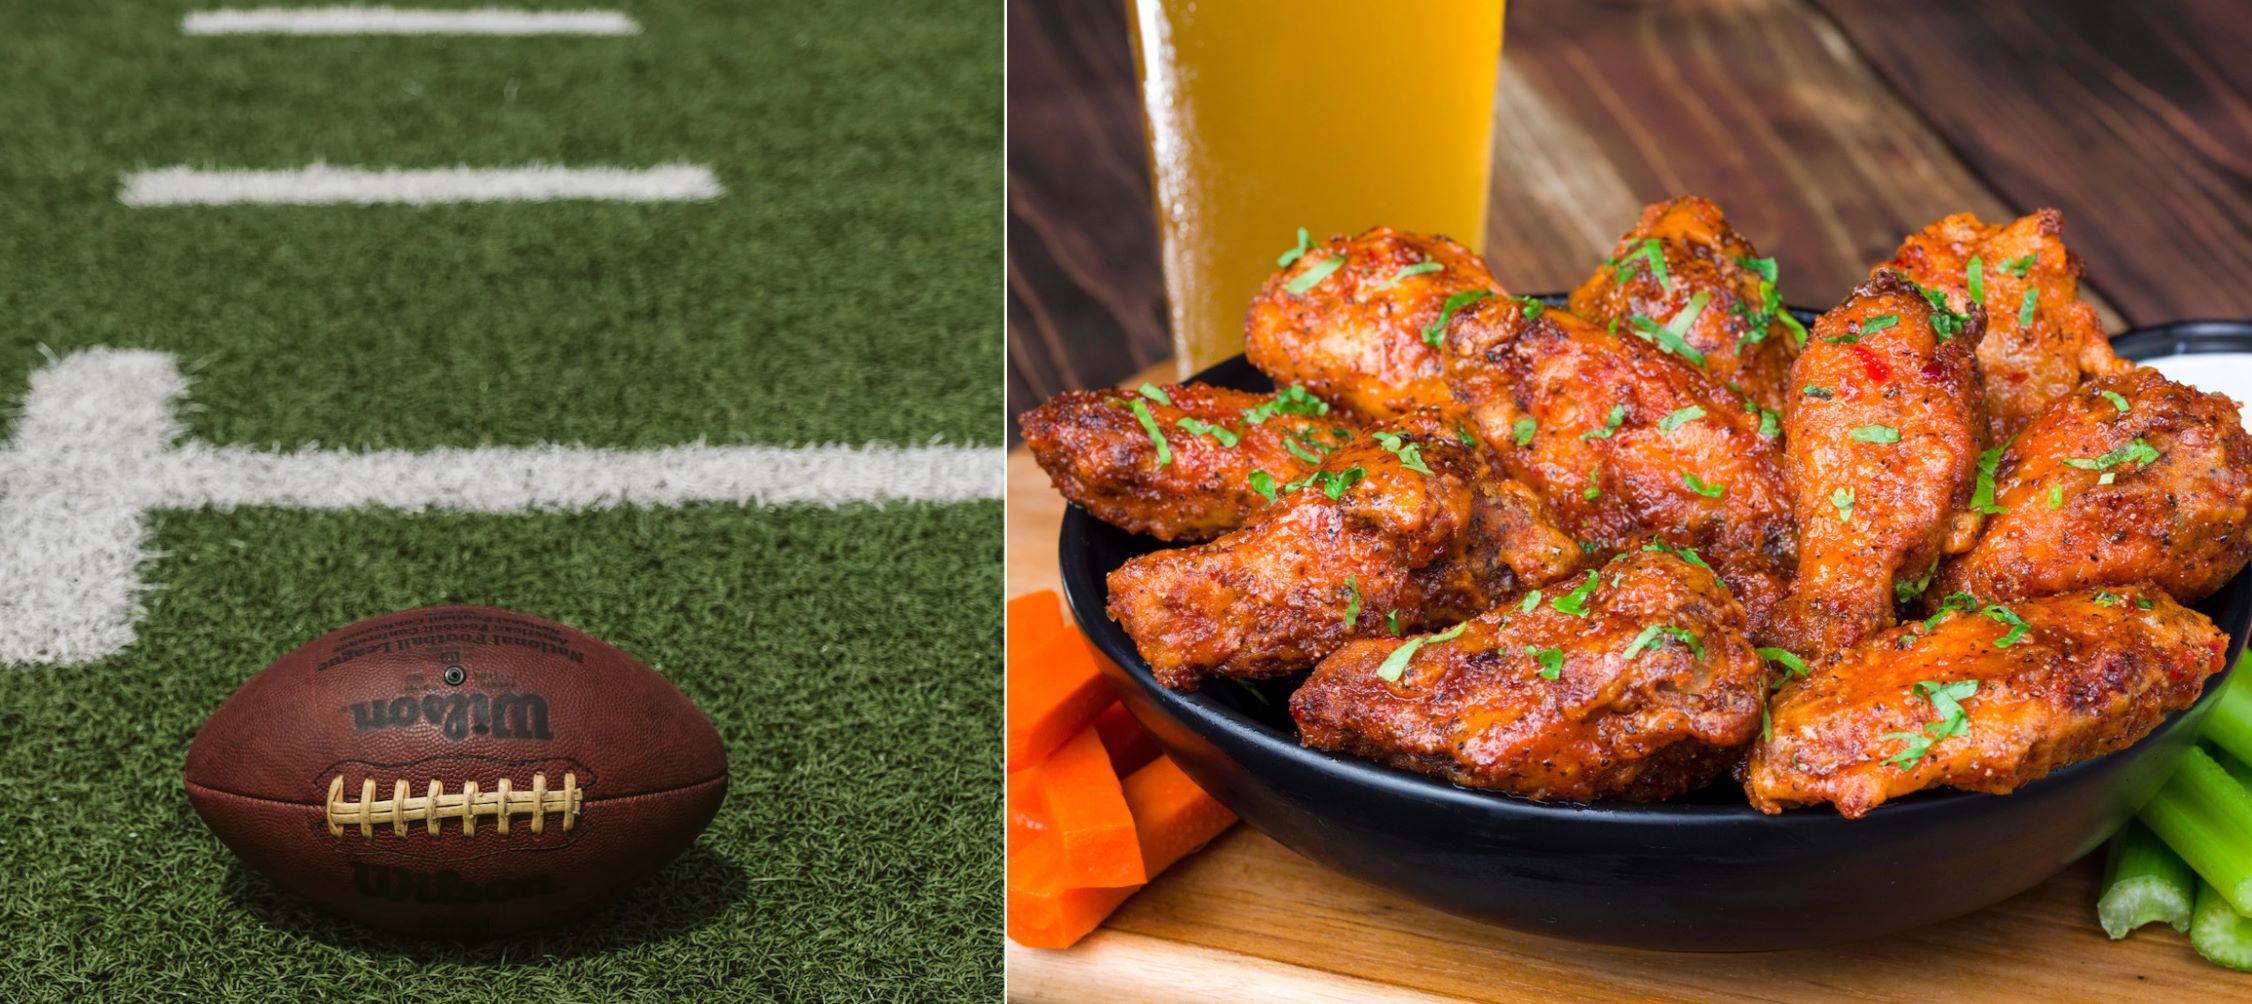 Touchdown! Scoring the Best Spots to Watch Football in Los Angeles